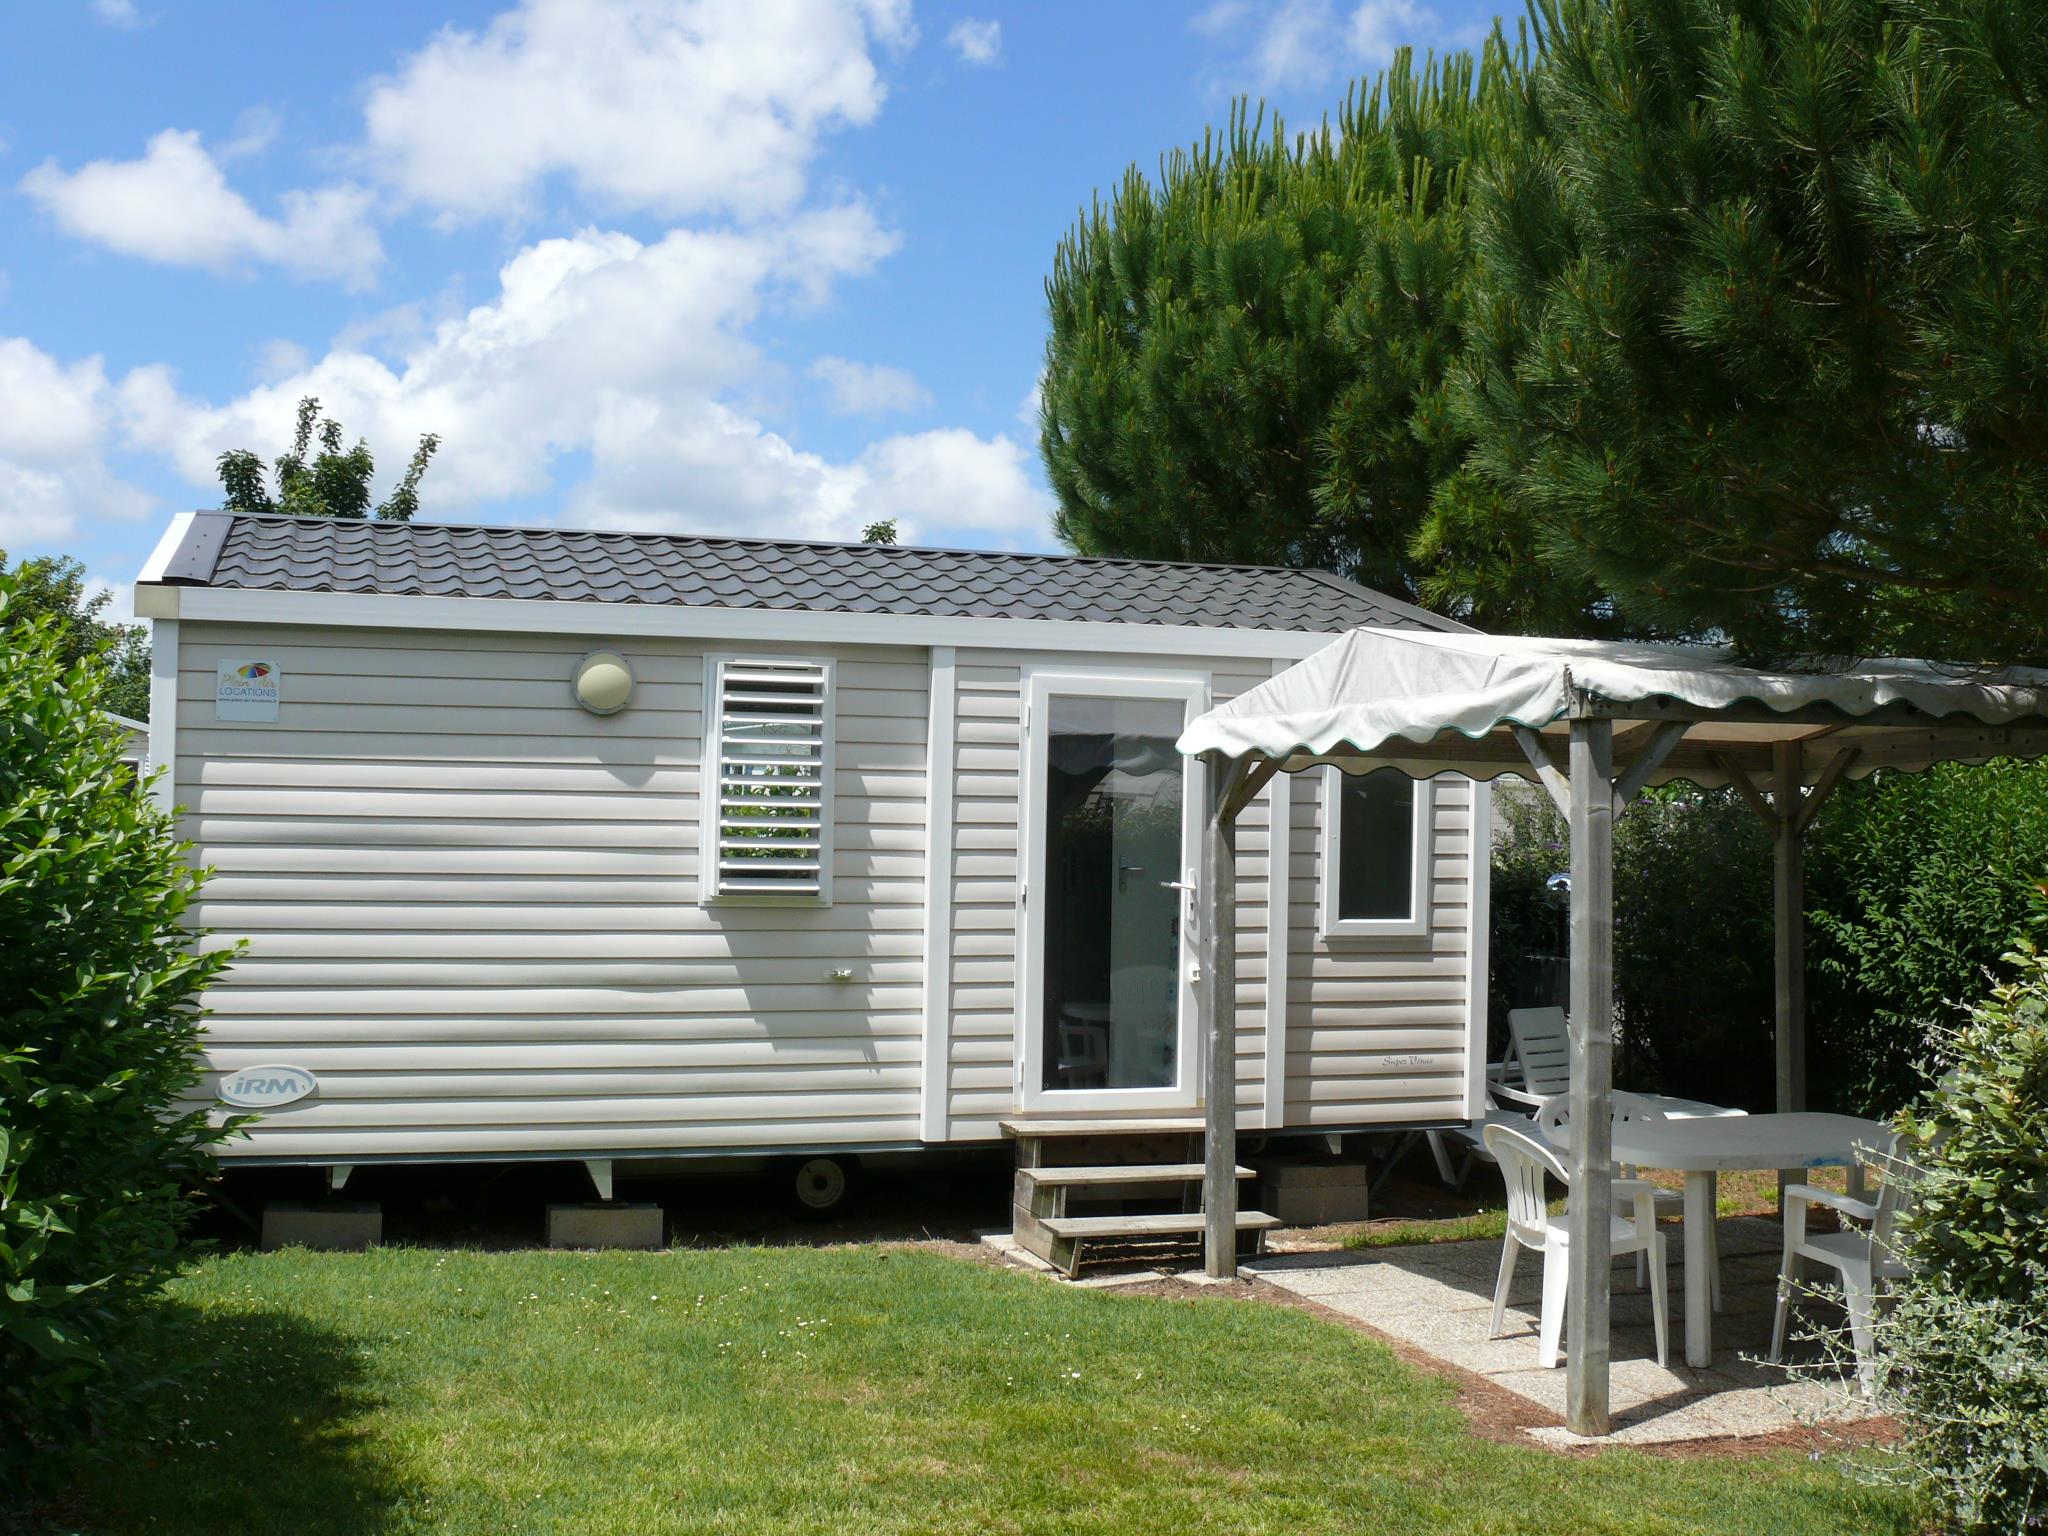 Accommodation - Mh  Gamme Liberté 2 Ch 23 M² 2/4 Personnes - Plein Air Locations- camping Palmyre Loisirs